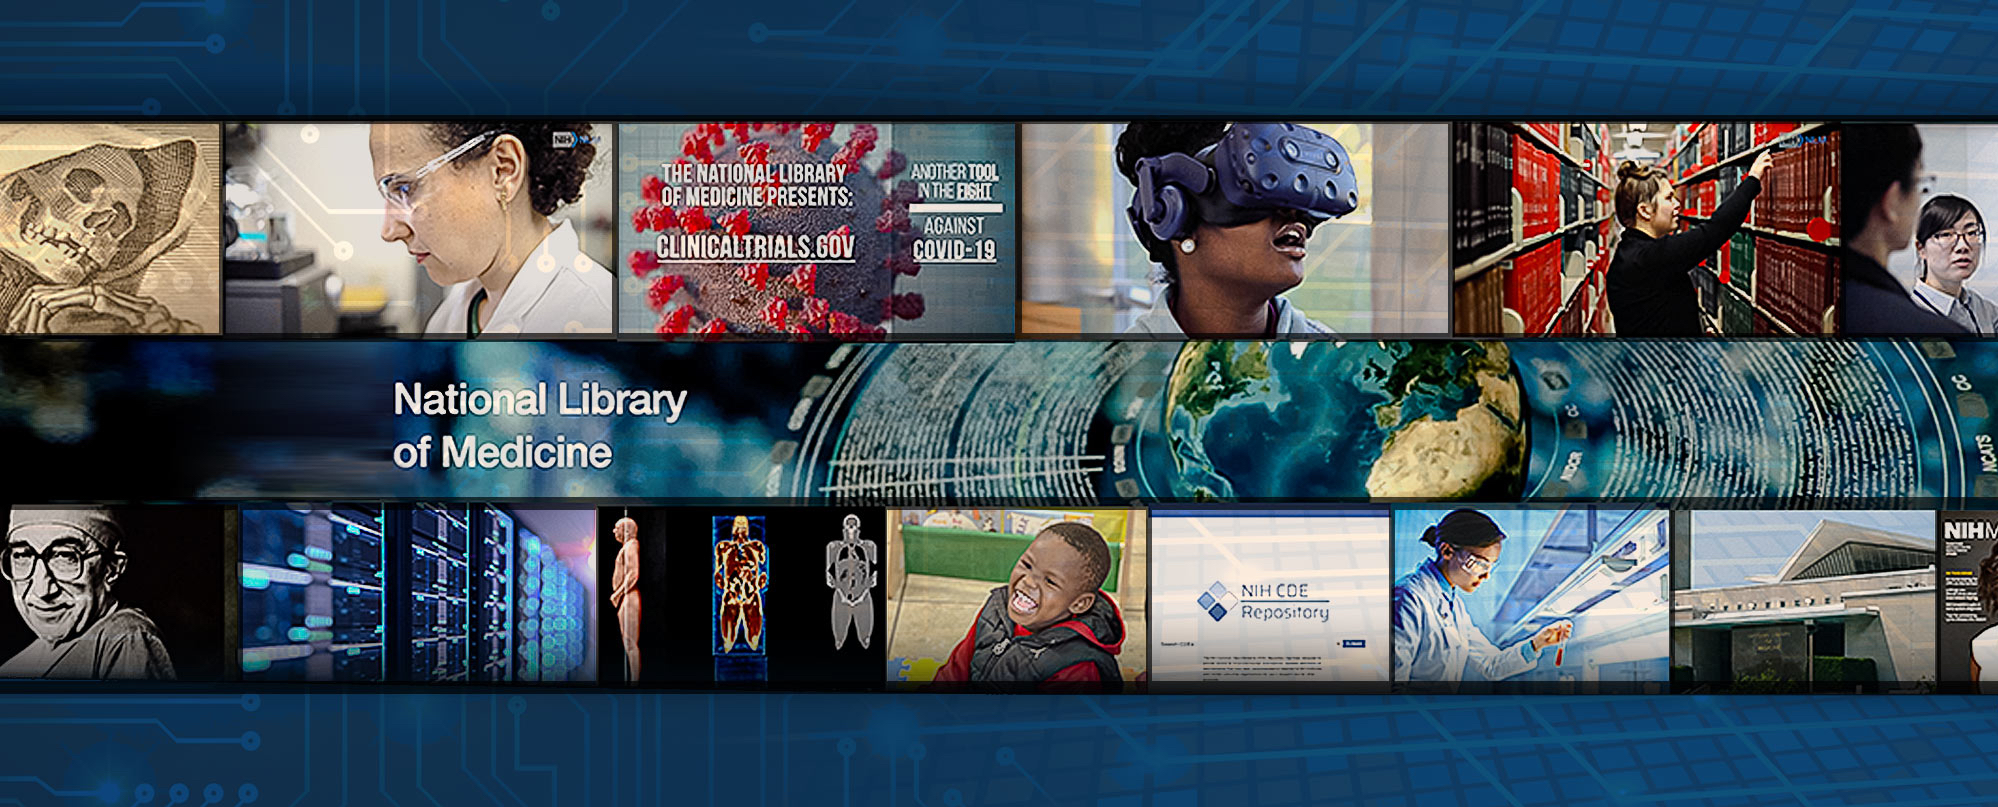 This graphics show various aspects and services of NLM. Top row of photos includes History of Medicine, researcher, VR and COVID images. Bottom row includes Visible Human Projects, photo of computer servers, and the NLM building. A globe is in the middle.